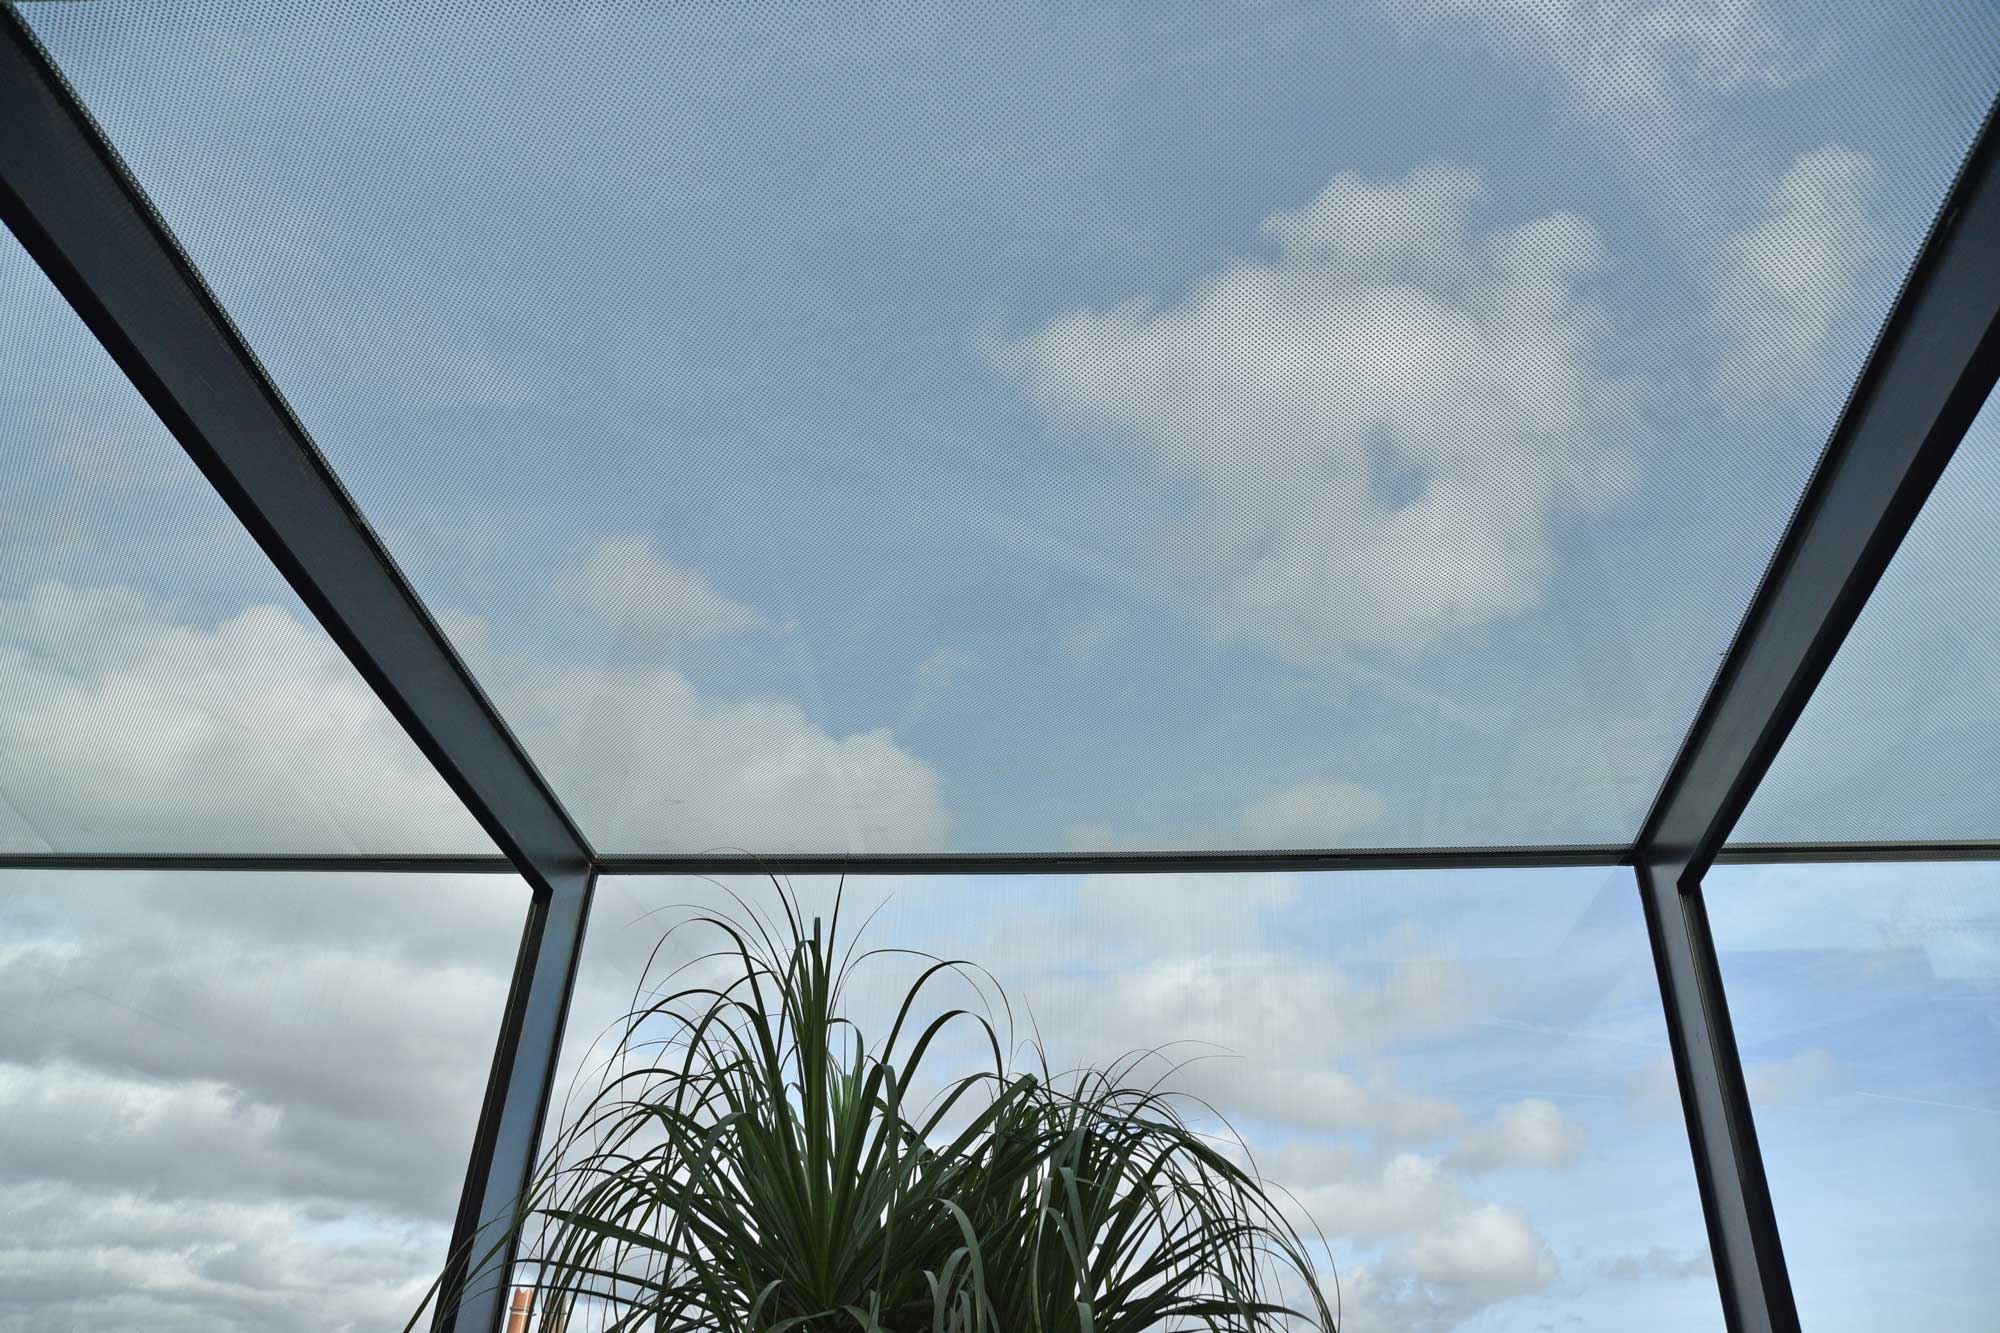 78 St Jamess Street OAG Architectural Glass Roofs